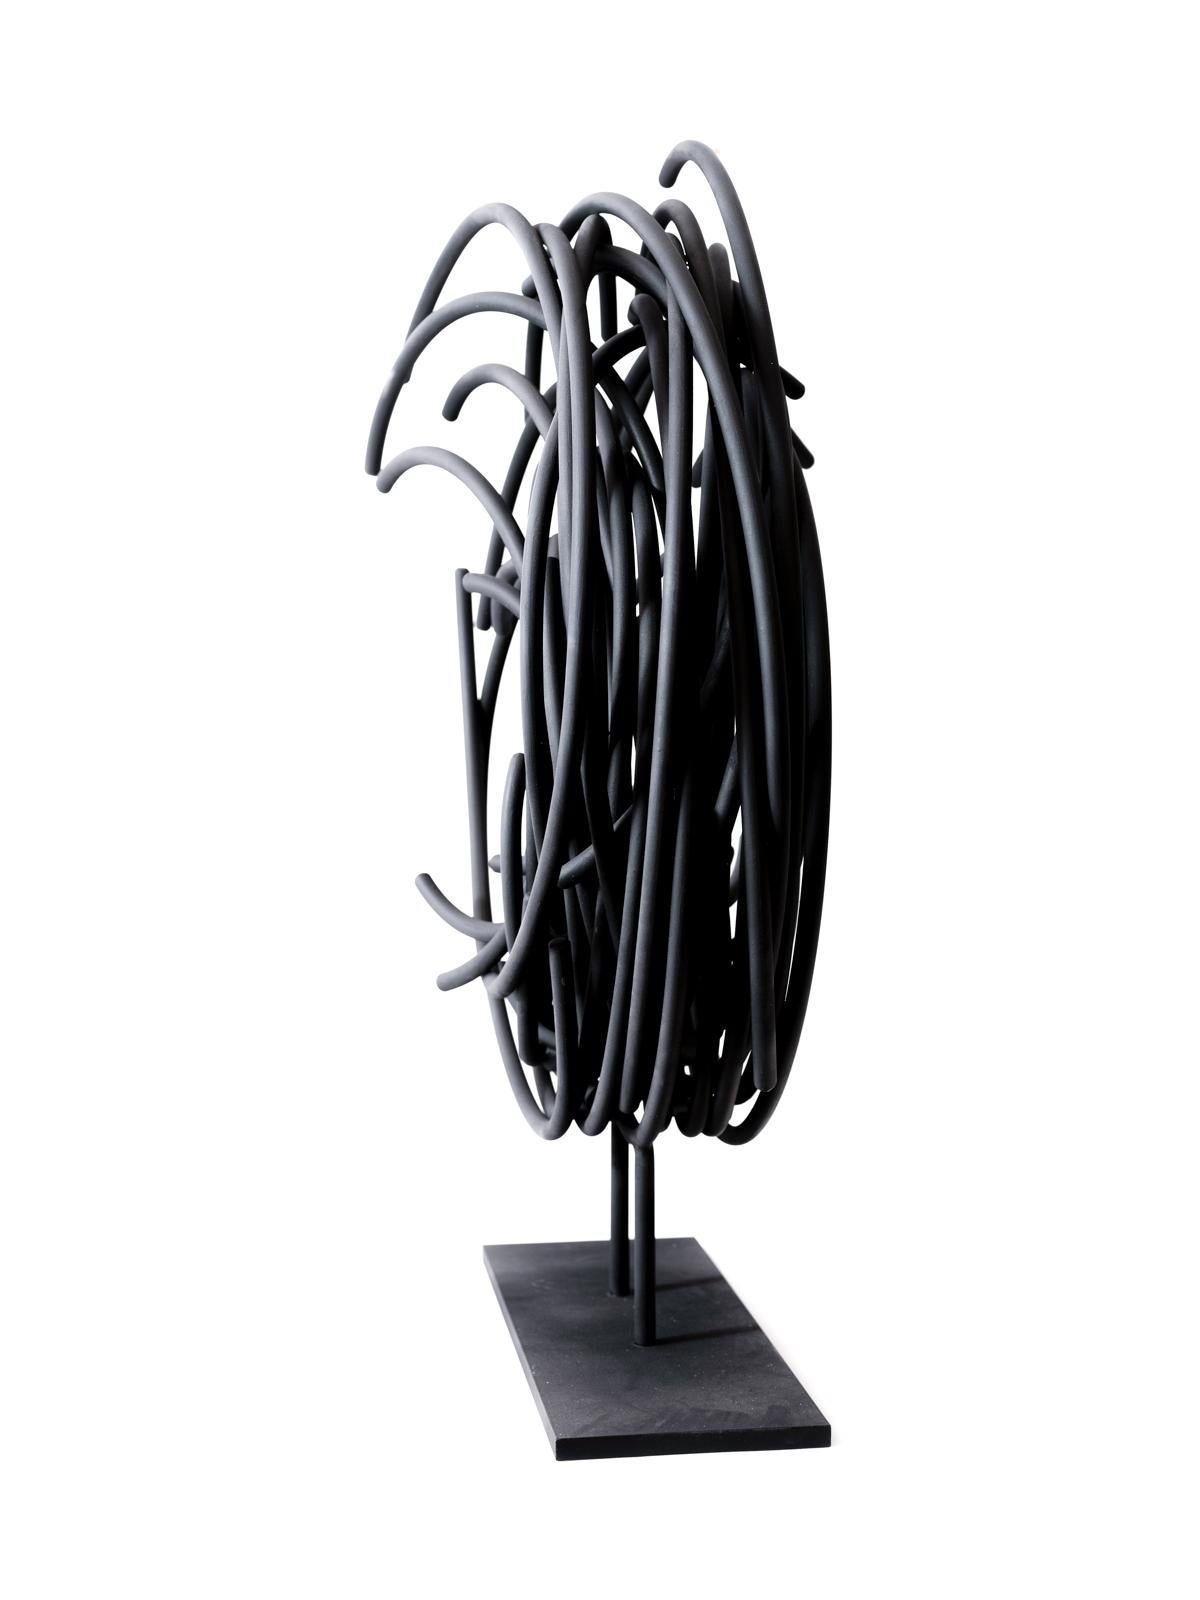 Maelstrom Series No 4 - layered, intersecting, forged aluminum sculpture For Sale 1